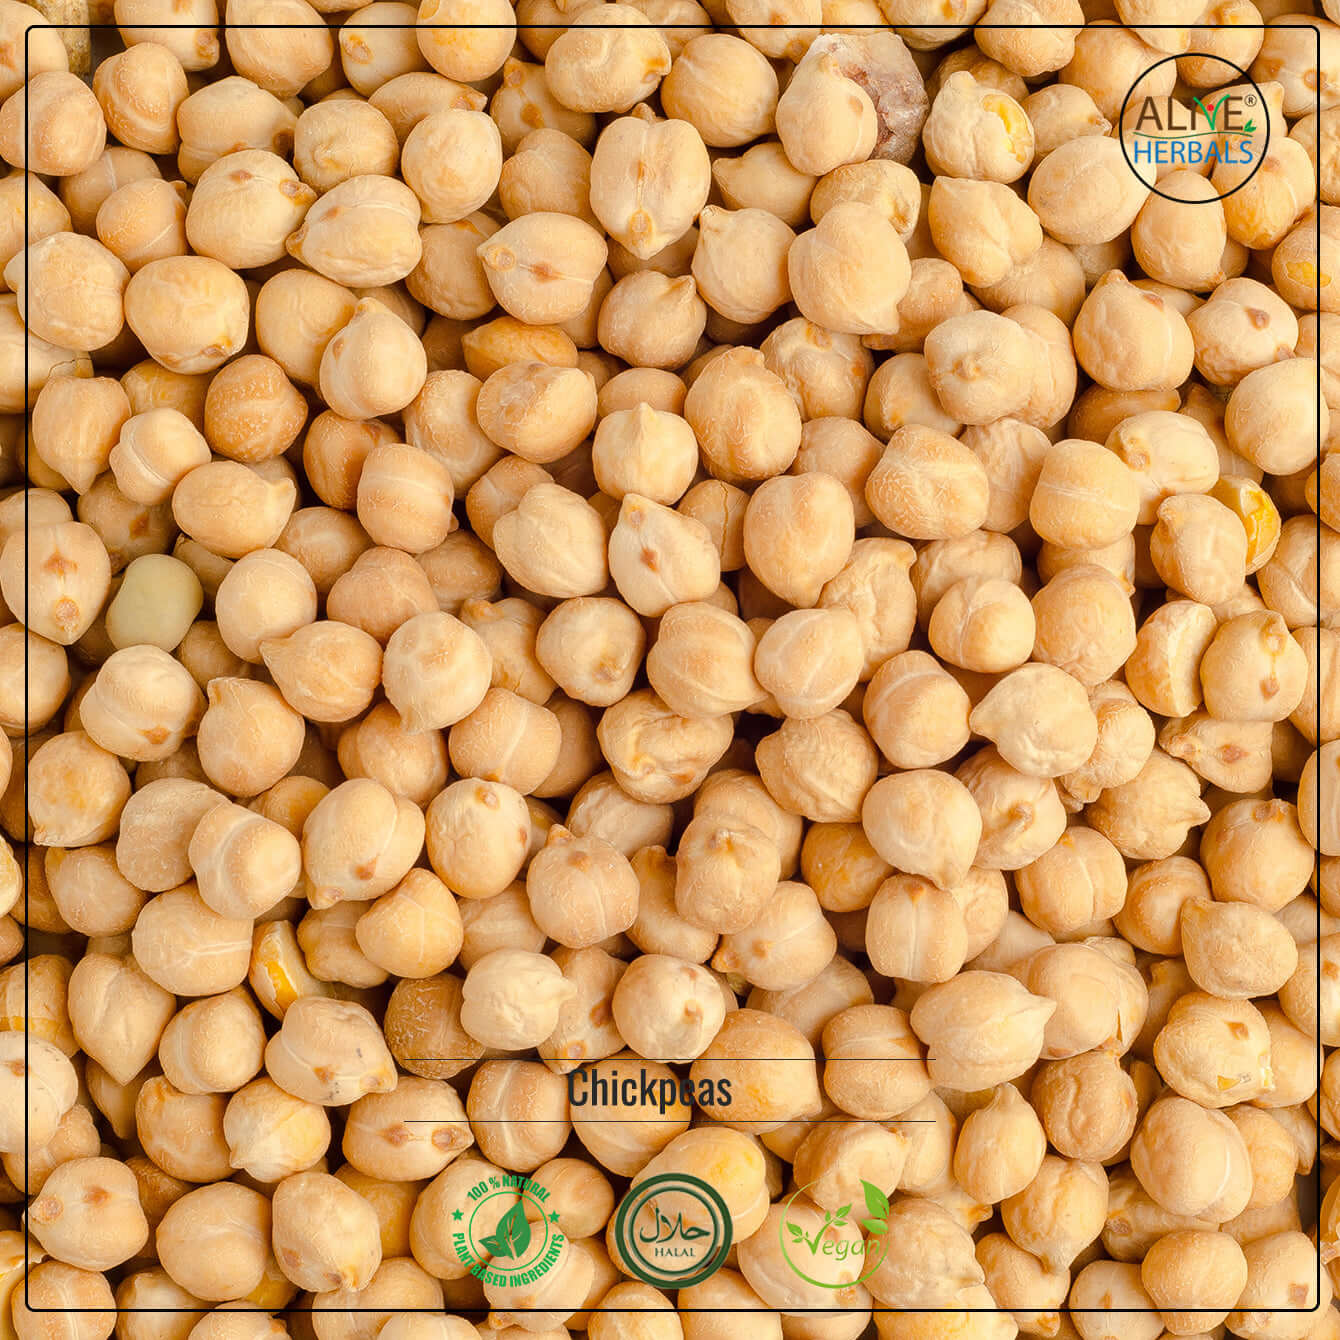 Chickpeas - Shop at Natural Food Store | Alive Herbals.